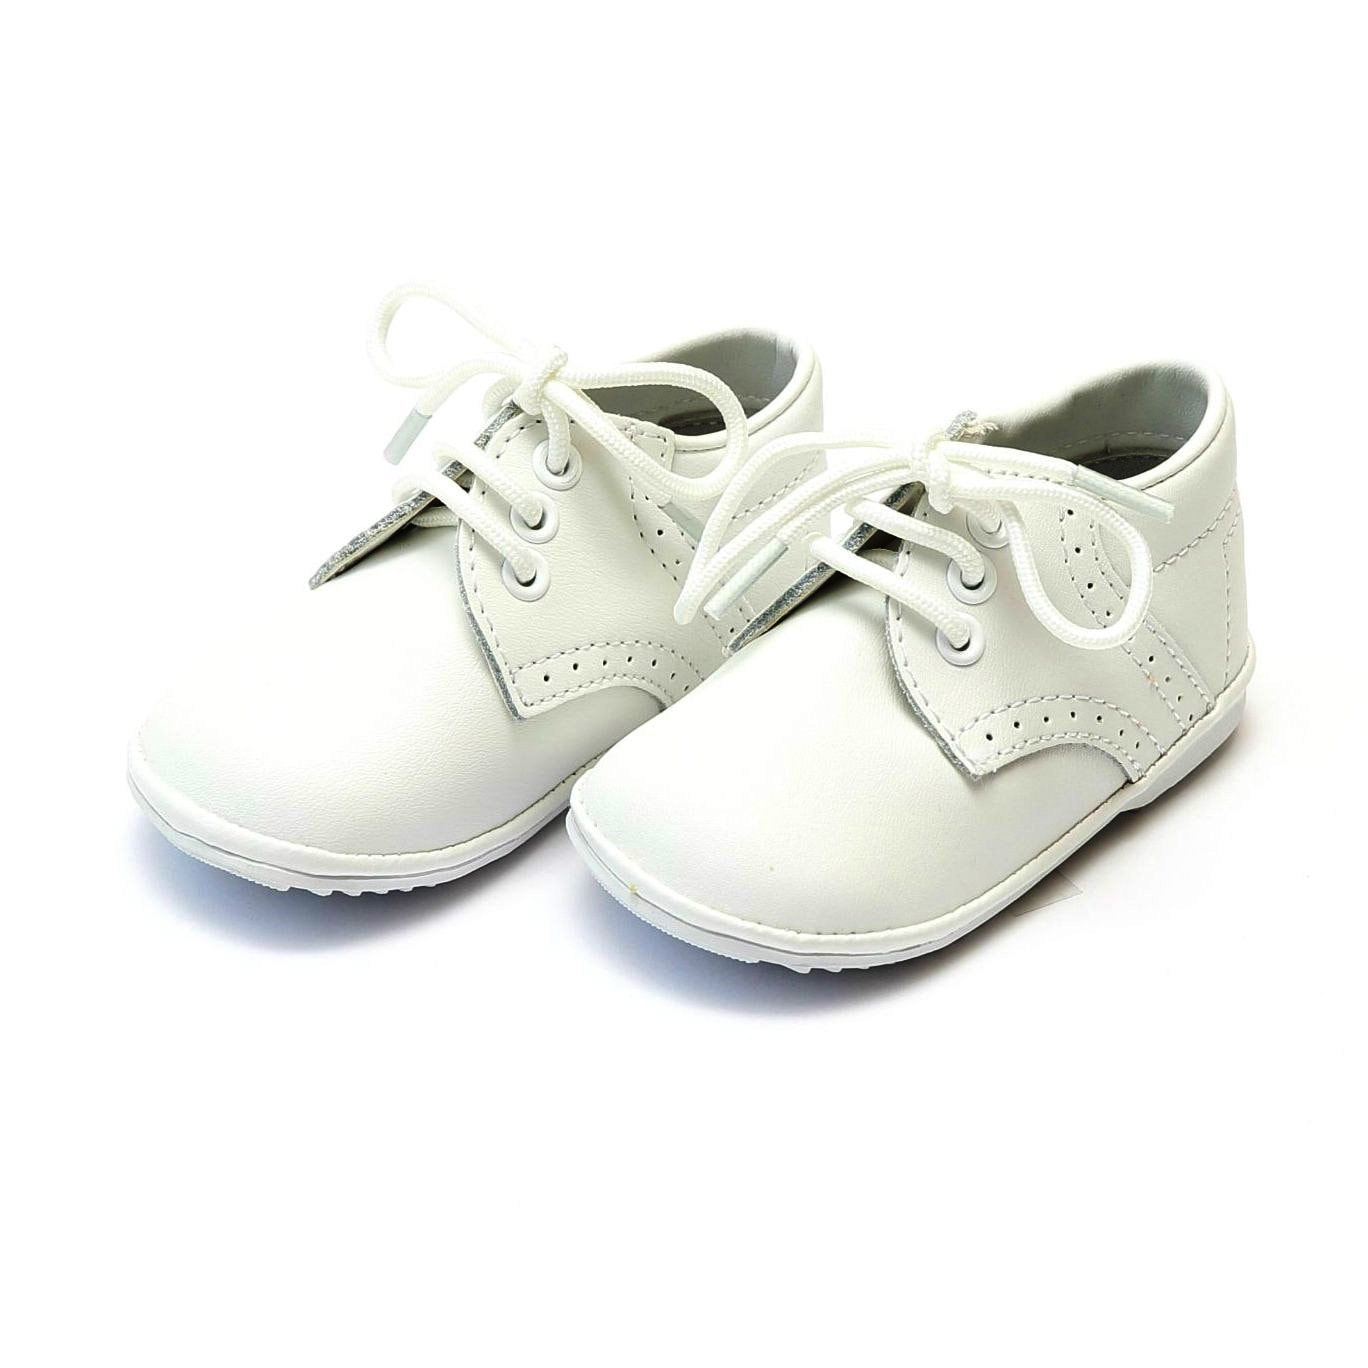 Angel Baby Shoes by L'amour - White